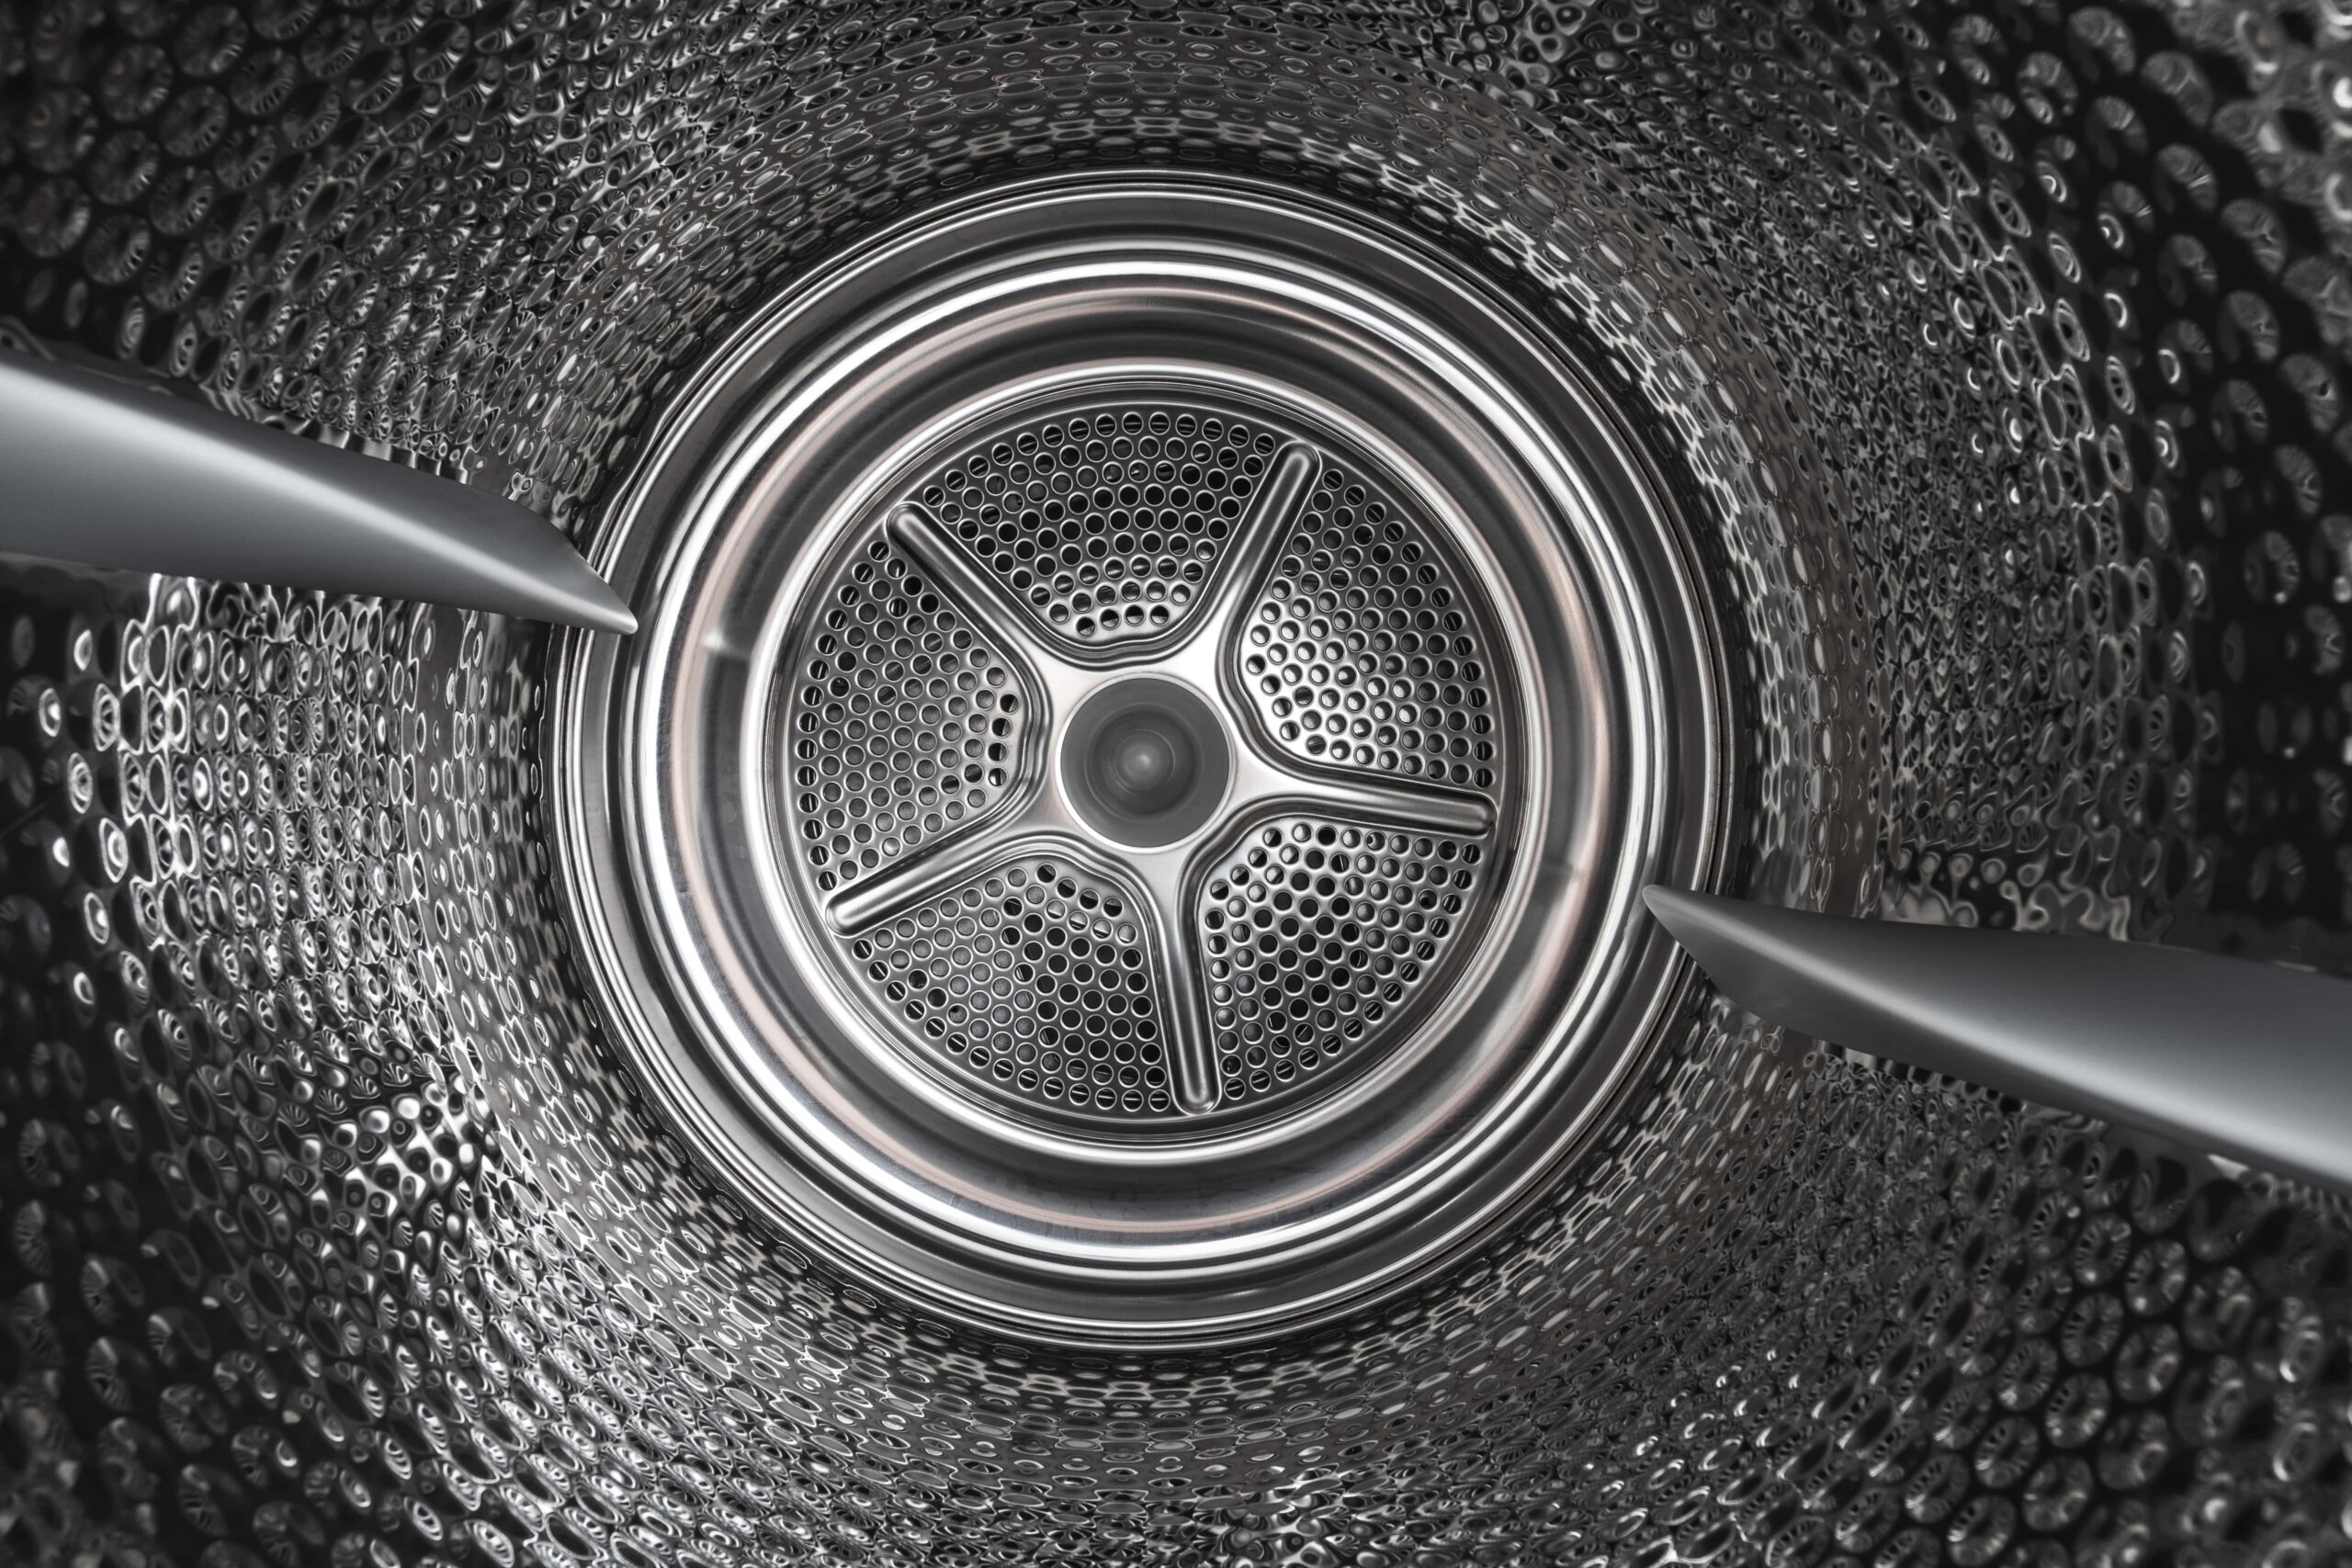 inside of a washer drum